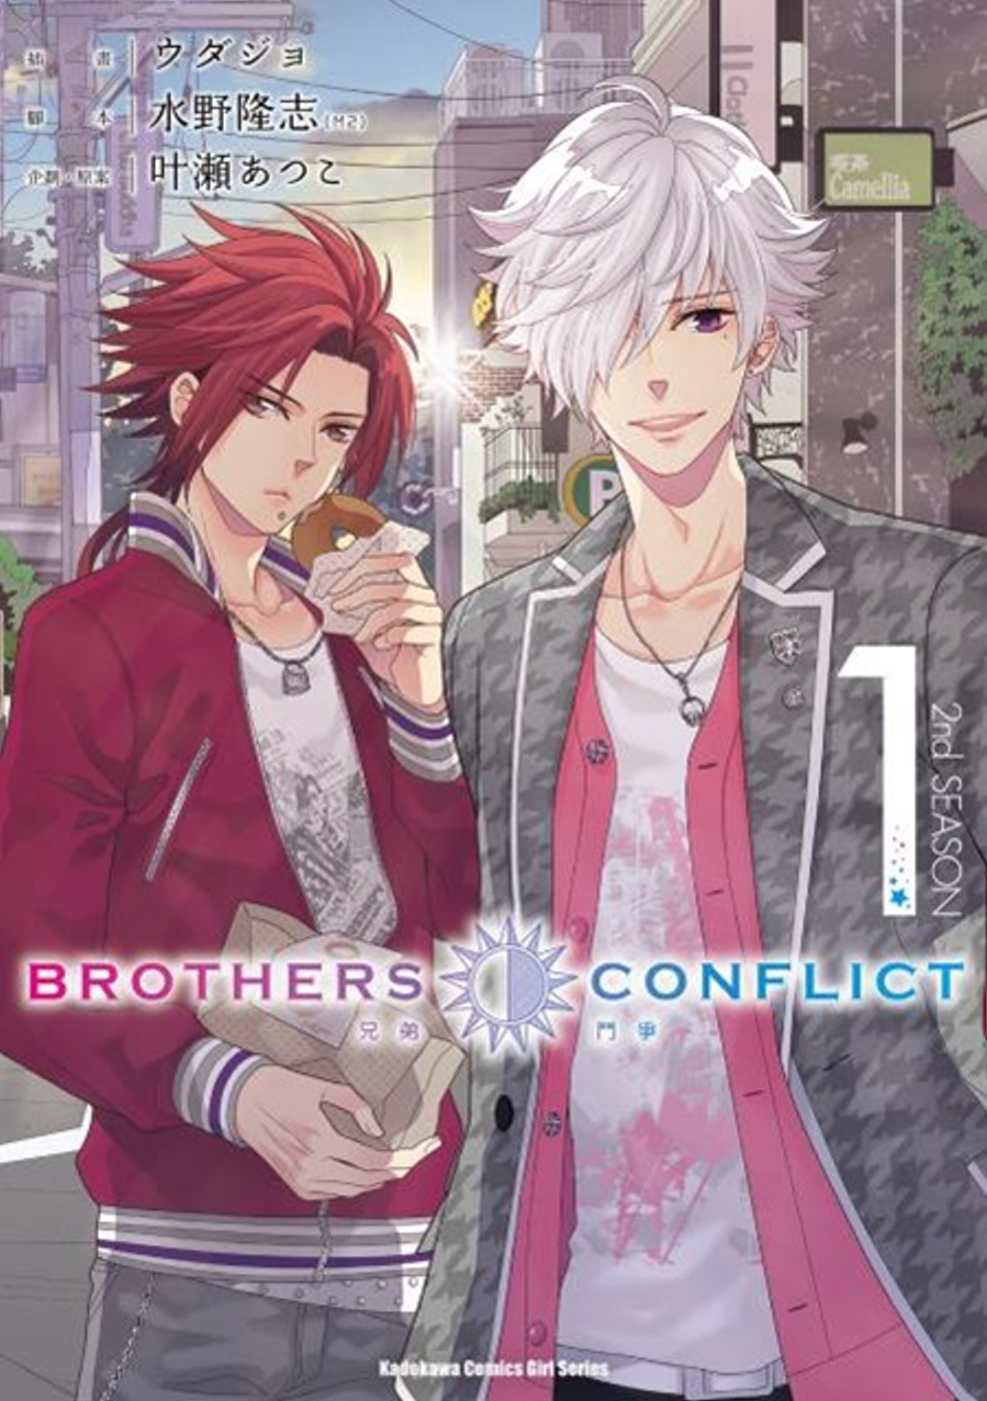 BROTHERS CONFLICT 2nd SEASON (...